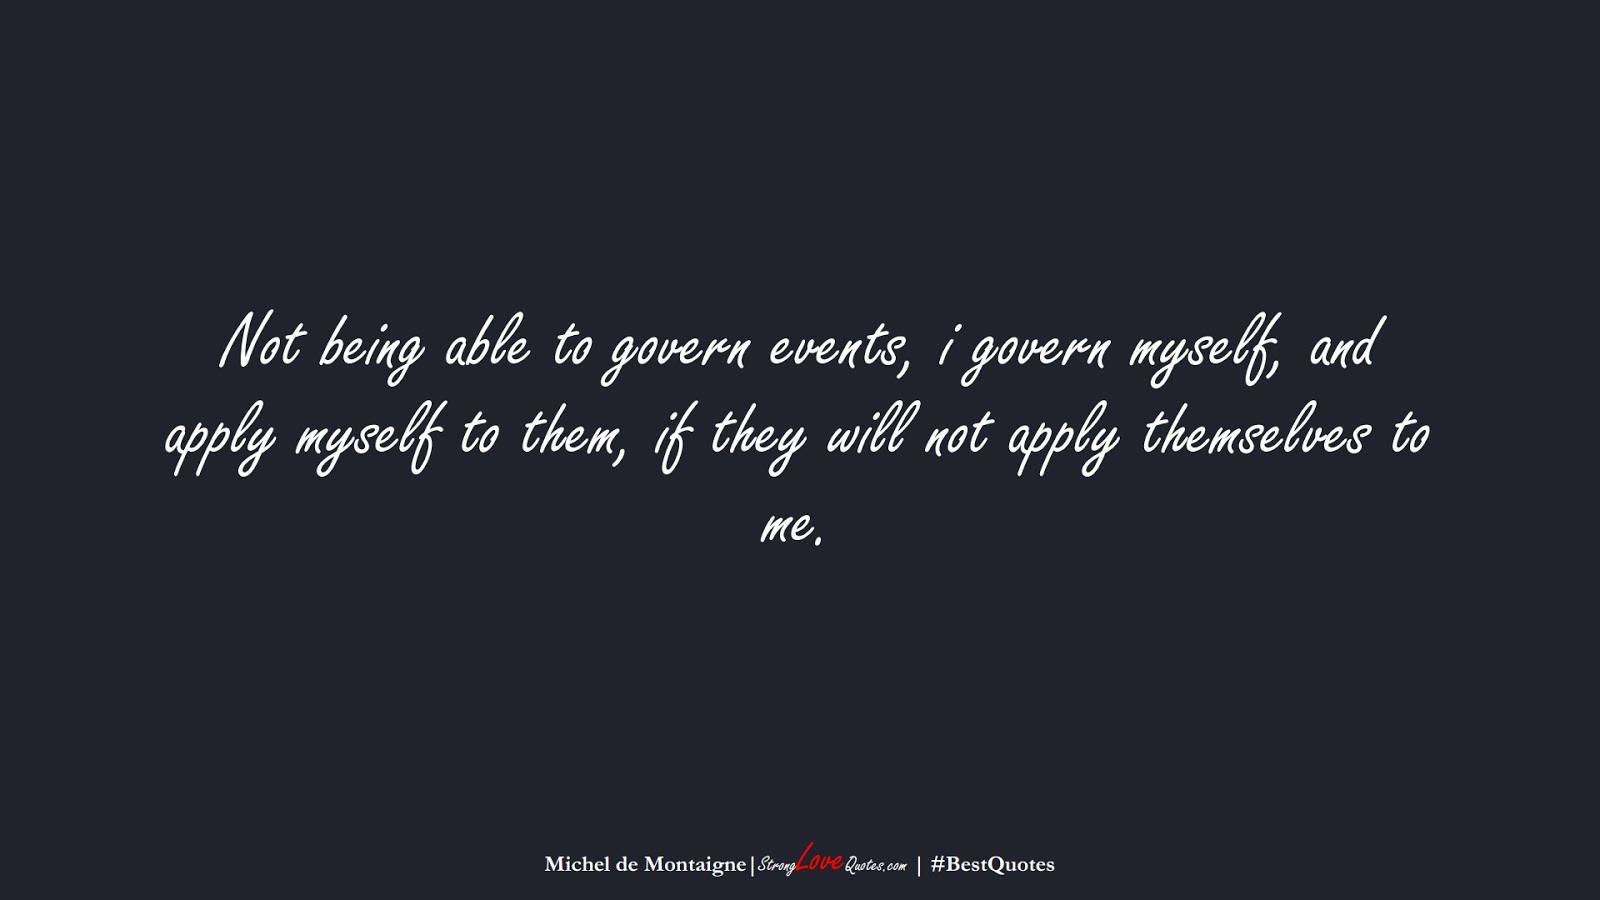 Not being able to govern events, i govern myself, and apply myself to them, if they will not apply themselves to me. (Michel de Montaigne);  #BestQuotes